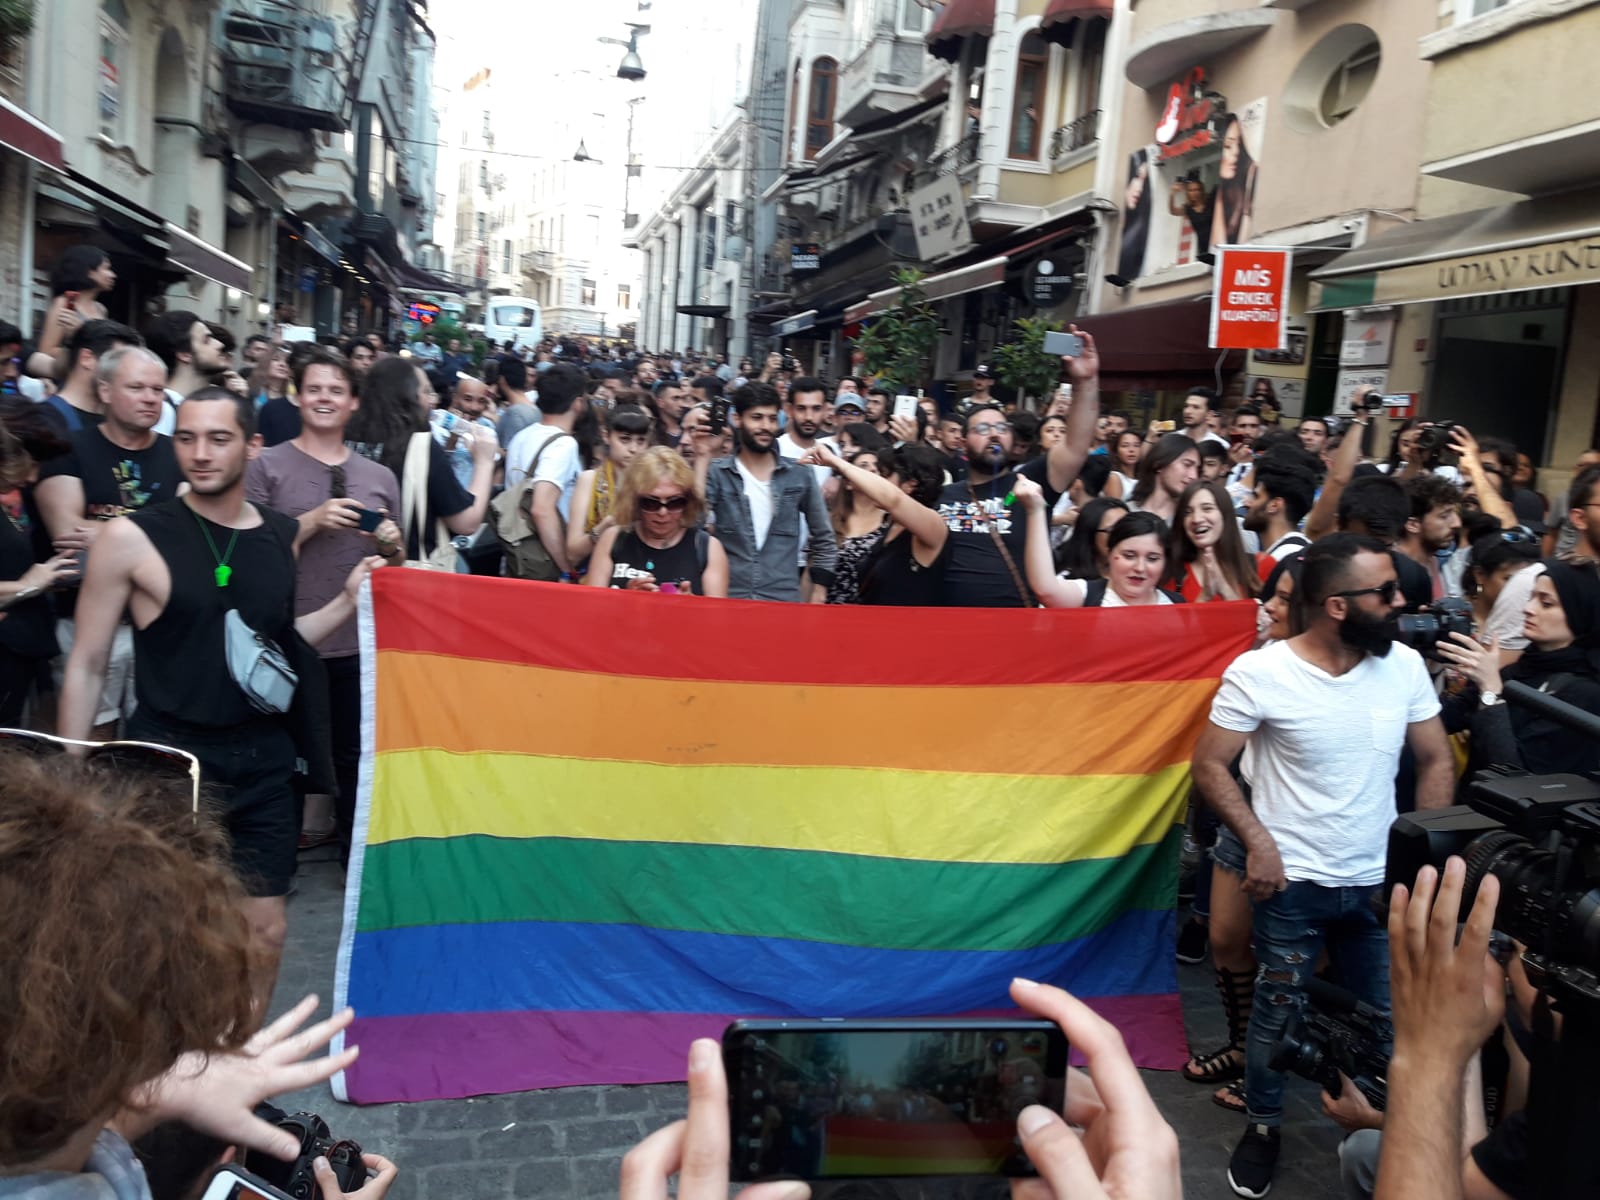 Minute by minute: What happened during Istanbul Pride? Kaos GL - News Portal for LGBTI+